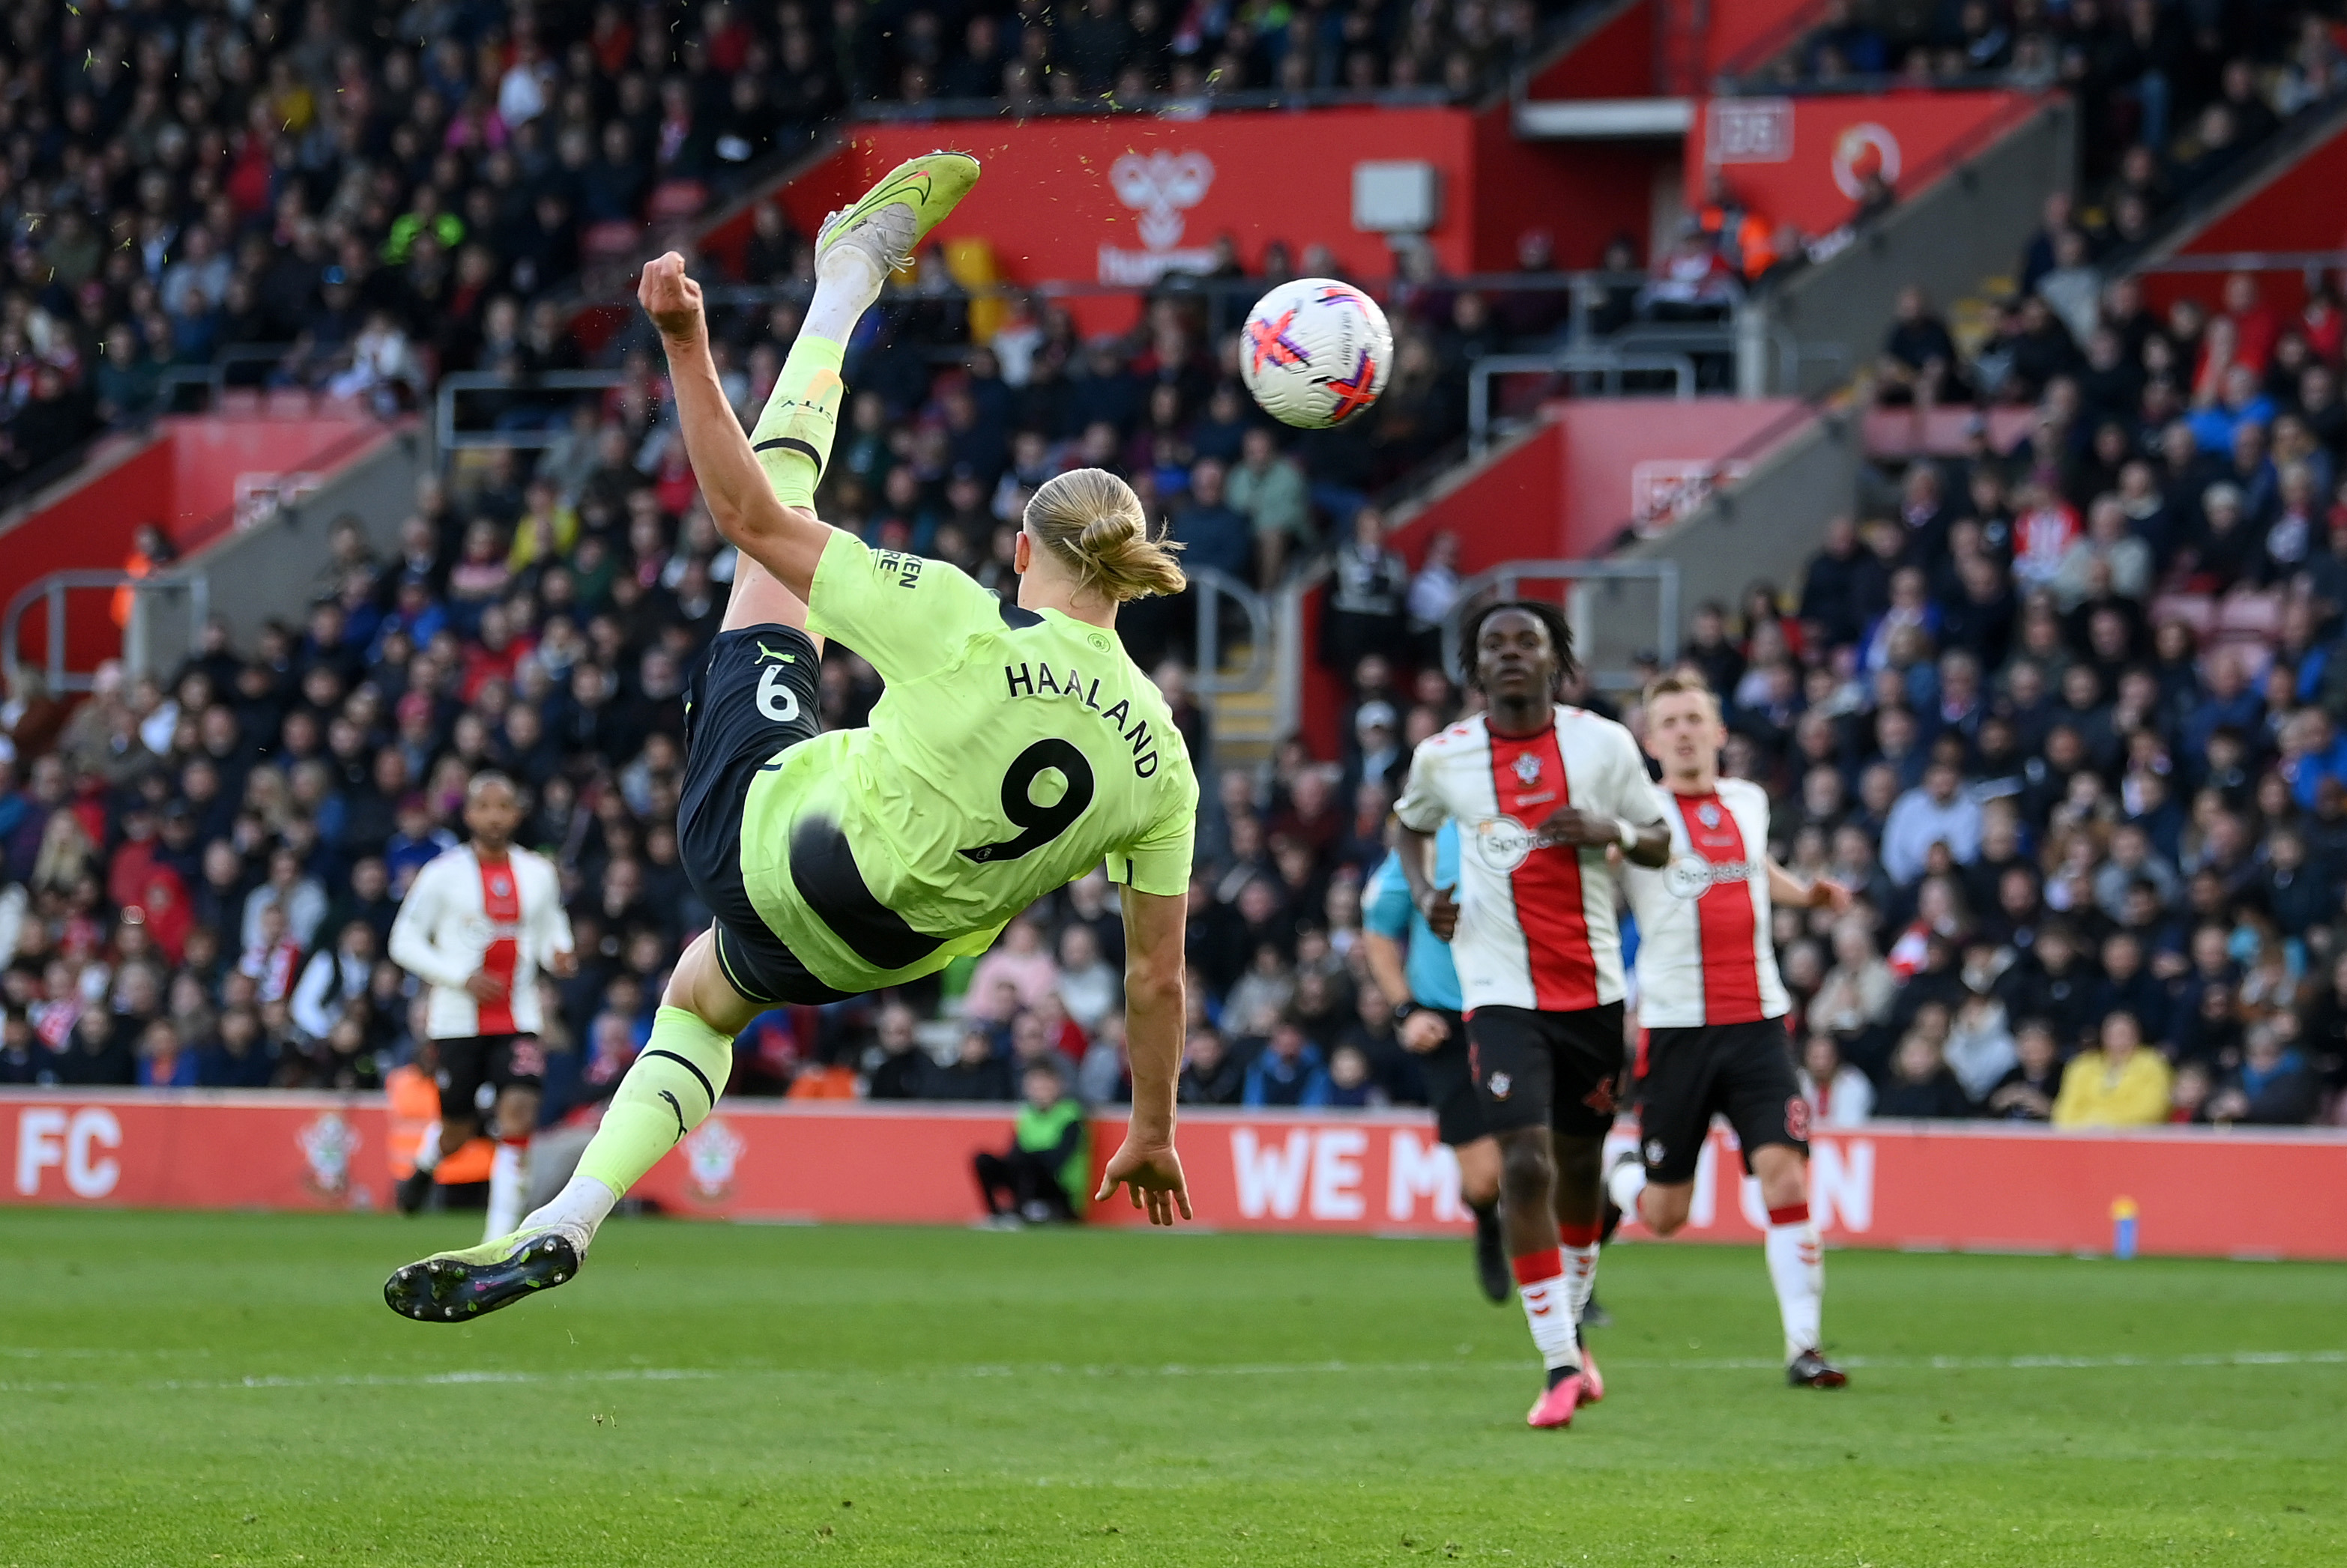 SOUTHAMPTON, ENGLAND - APRIL 08: Erling Haaland of Manchester City scores the team's third goal during the Premier League match between Southampton FC and Manchester City at Friends Provident St. Mary's Stadium on April 08, 2023 in Southampton, England. (Photo by Mike Hewitt/Getty Images)